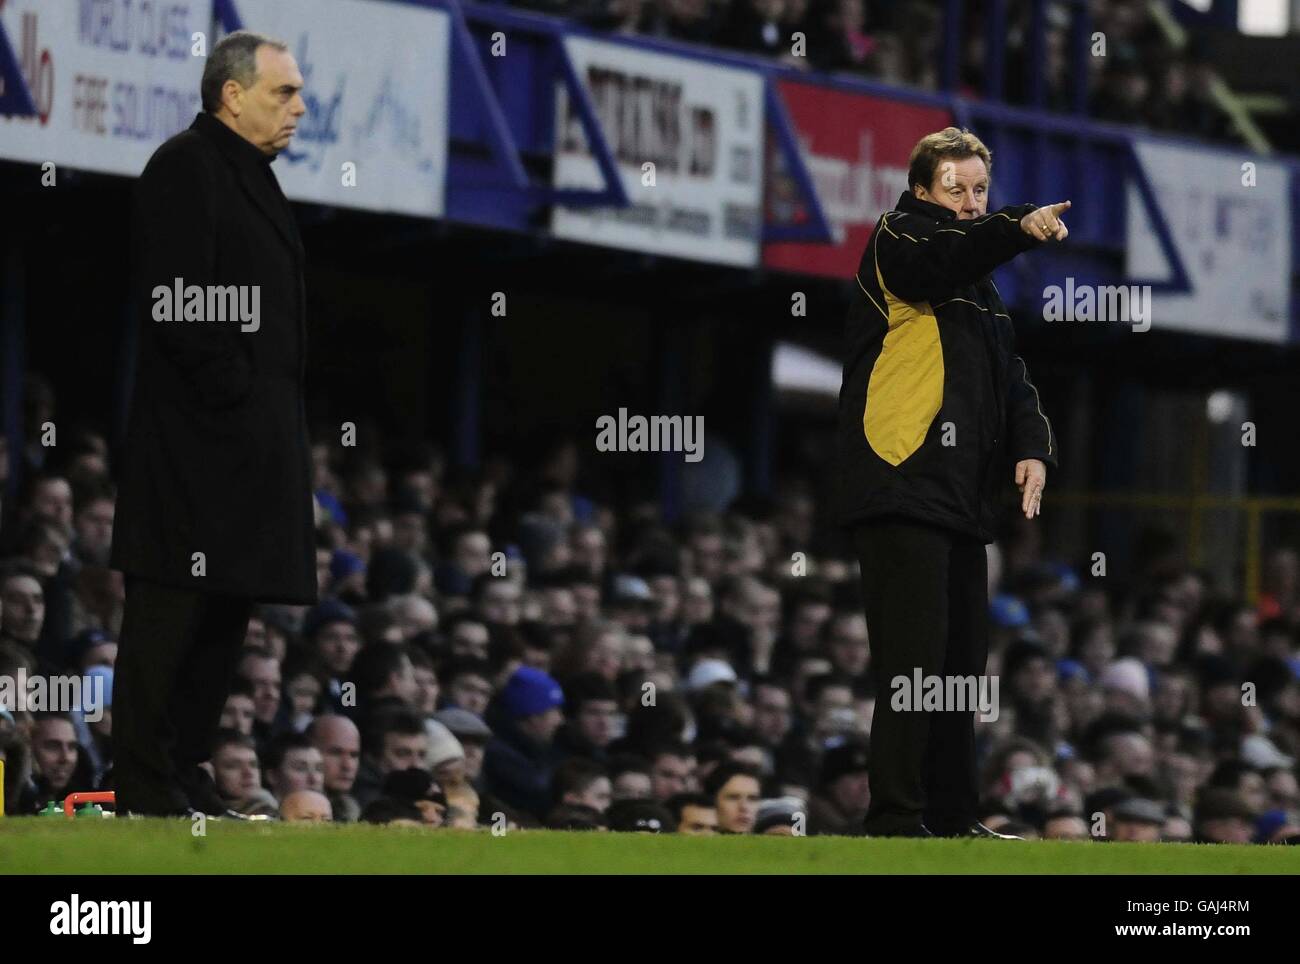 Chelsea's Avram Grant and Portsmouth's Harry Redknapp watch during the Barclay's Premier League match at Fratton Park, Portsmouth. Stock Photo